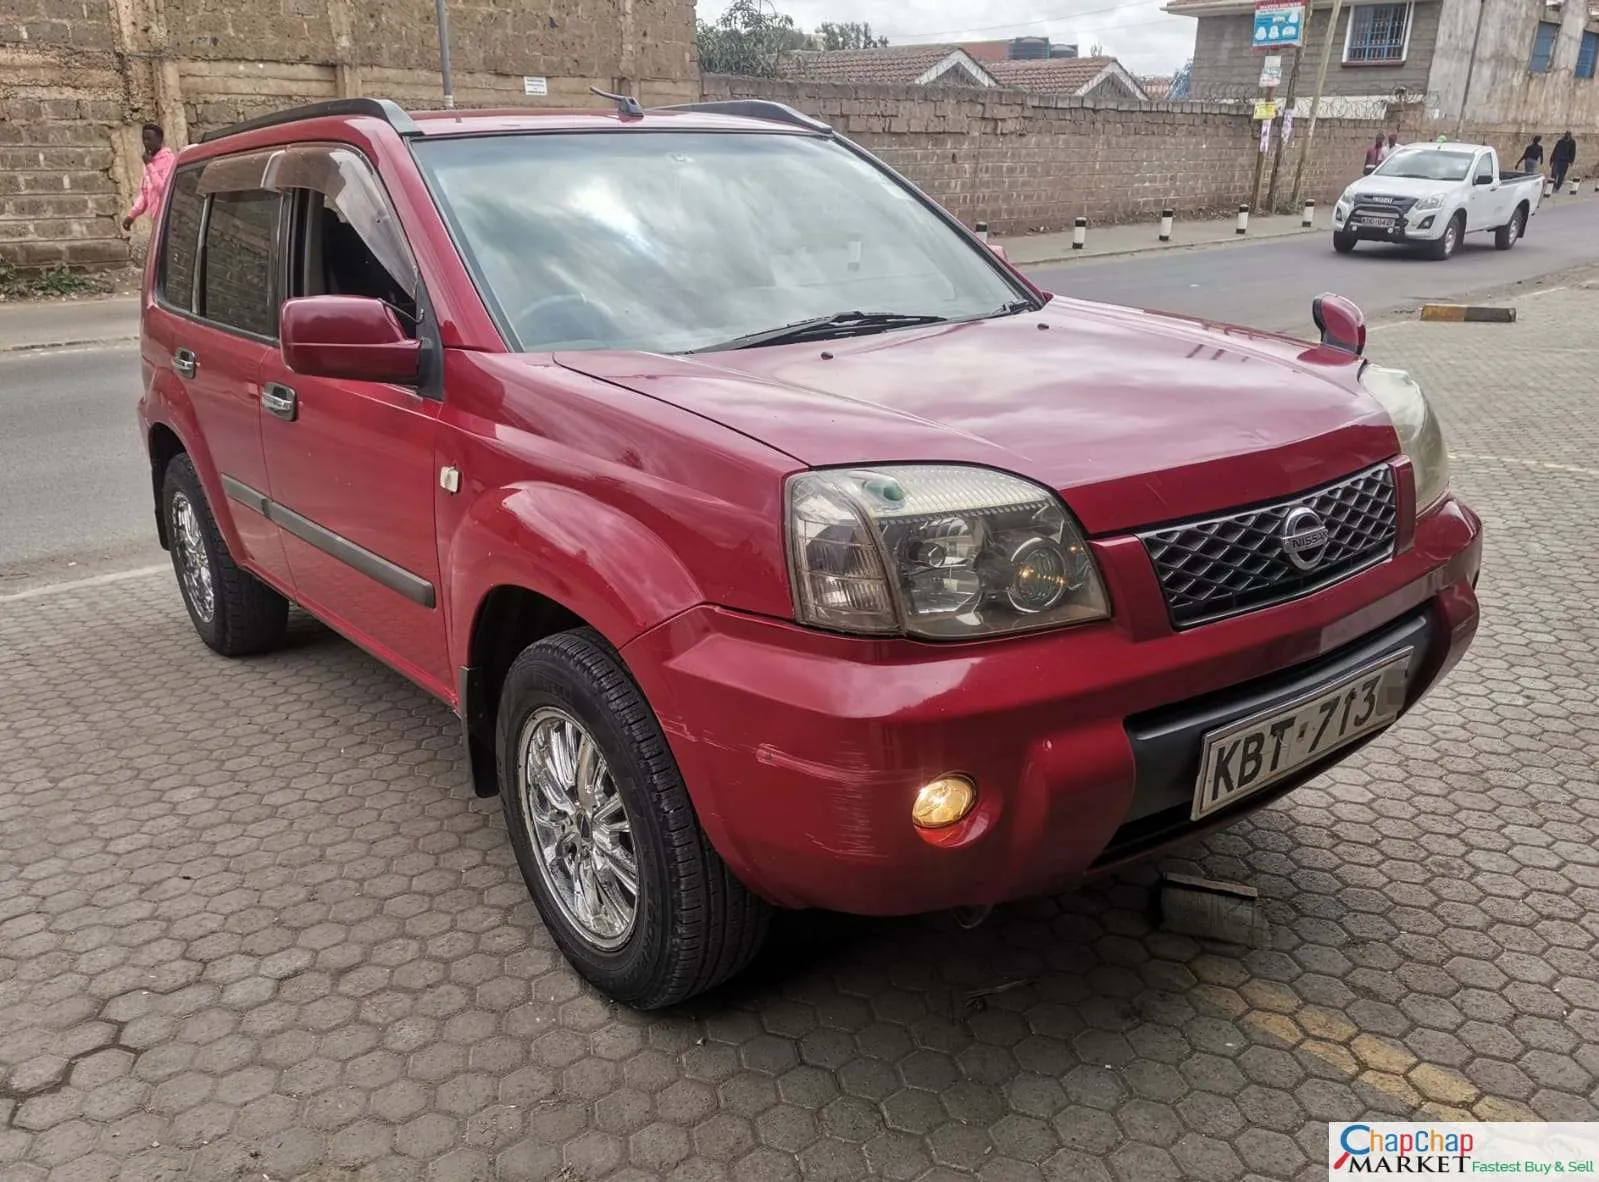 Cars Cars For Sale-Nissan XTRAIL for sale in Kenya QUICK SALE You Pay 30% Deposit Trade in Ok HIRE PURCHASE INSTALLMENTS BANK FINANCE OK 7